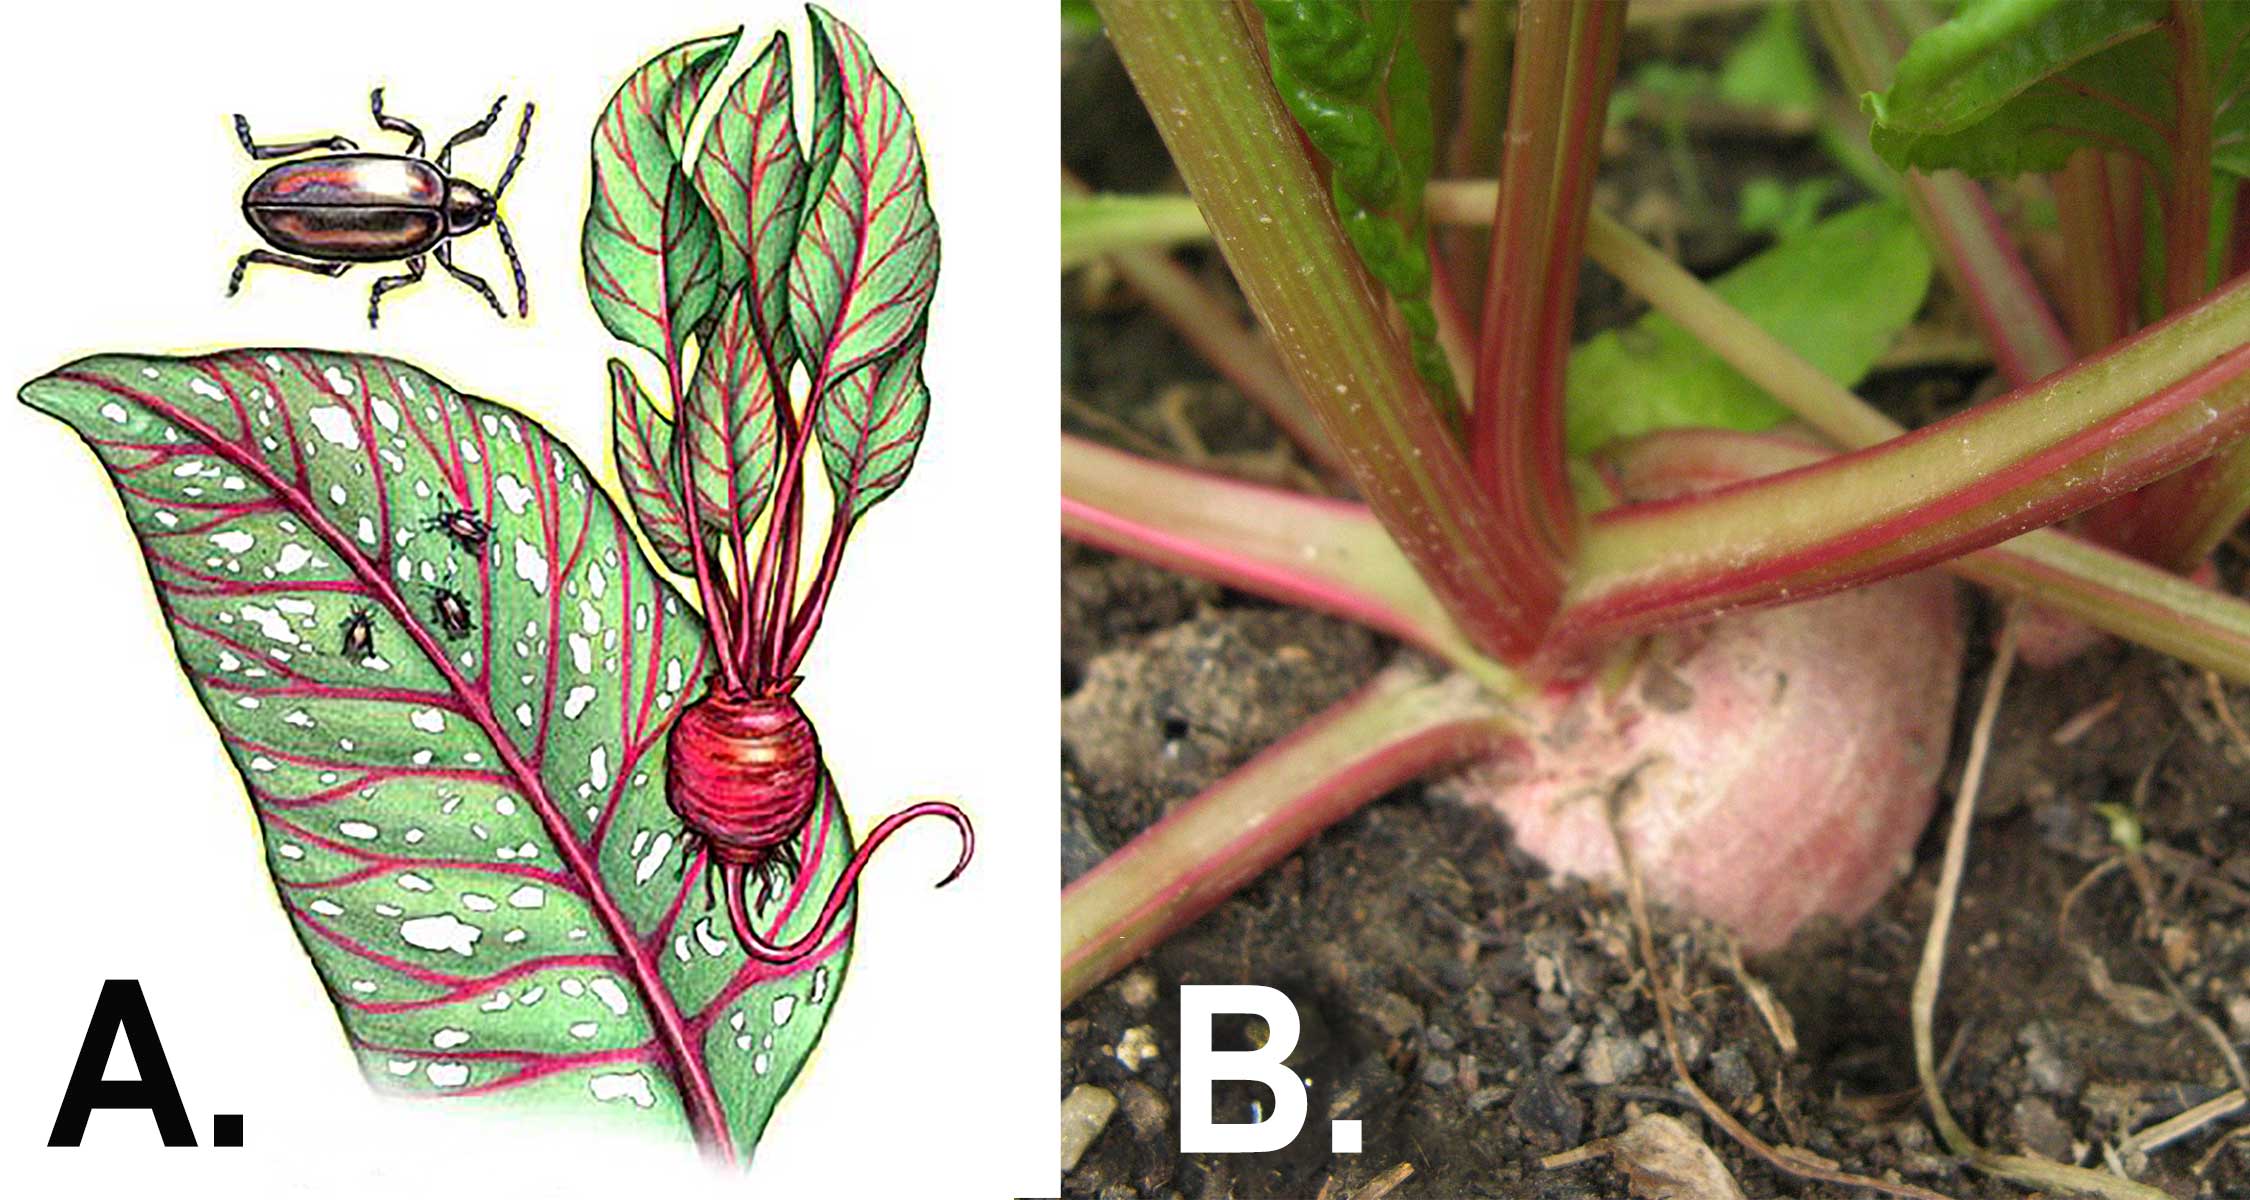 Left: Illustration of flea beetles on a beet plant. Right: Beet plant with all tops condition. The plant is close to another plant and has nearly uprooted itself.